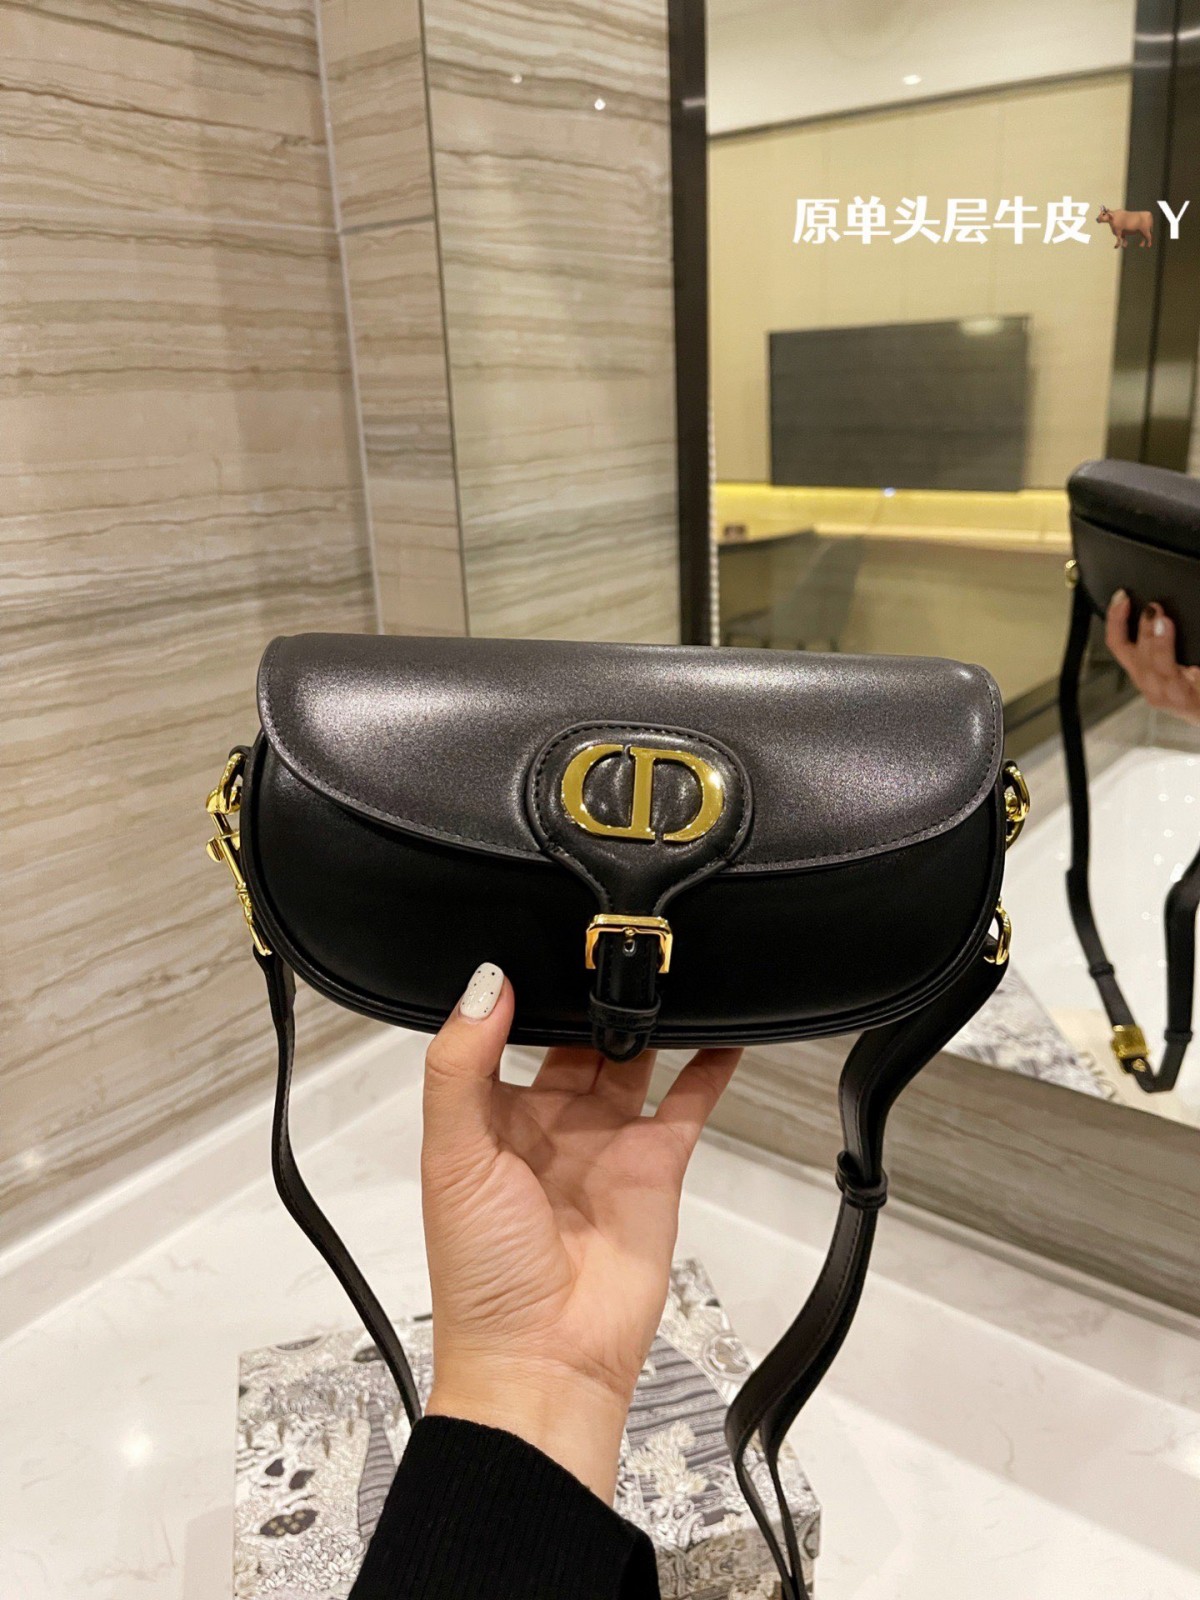 Why do people want to buy Dior Bobby East-West replica bags (2022 Special)-Best Quality Fake Louis Vuitton Bag Online Store, Replica designer bag ru